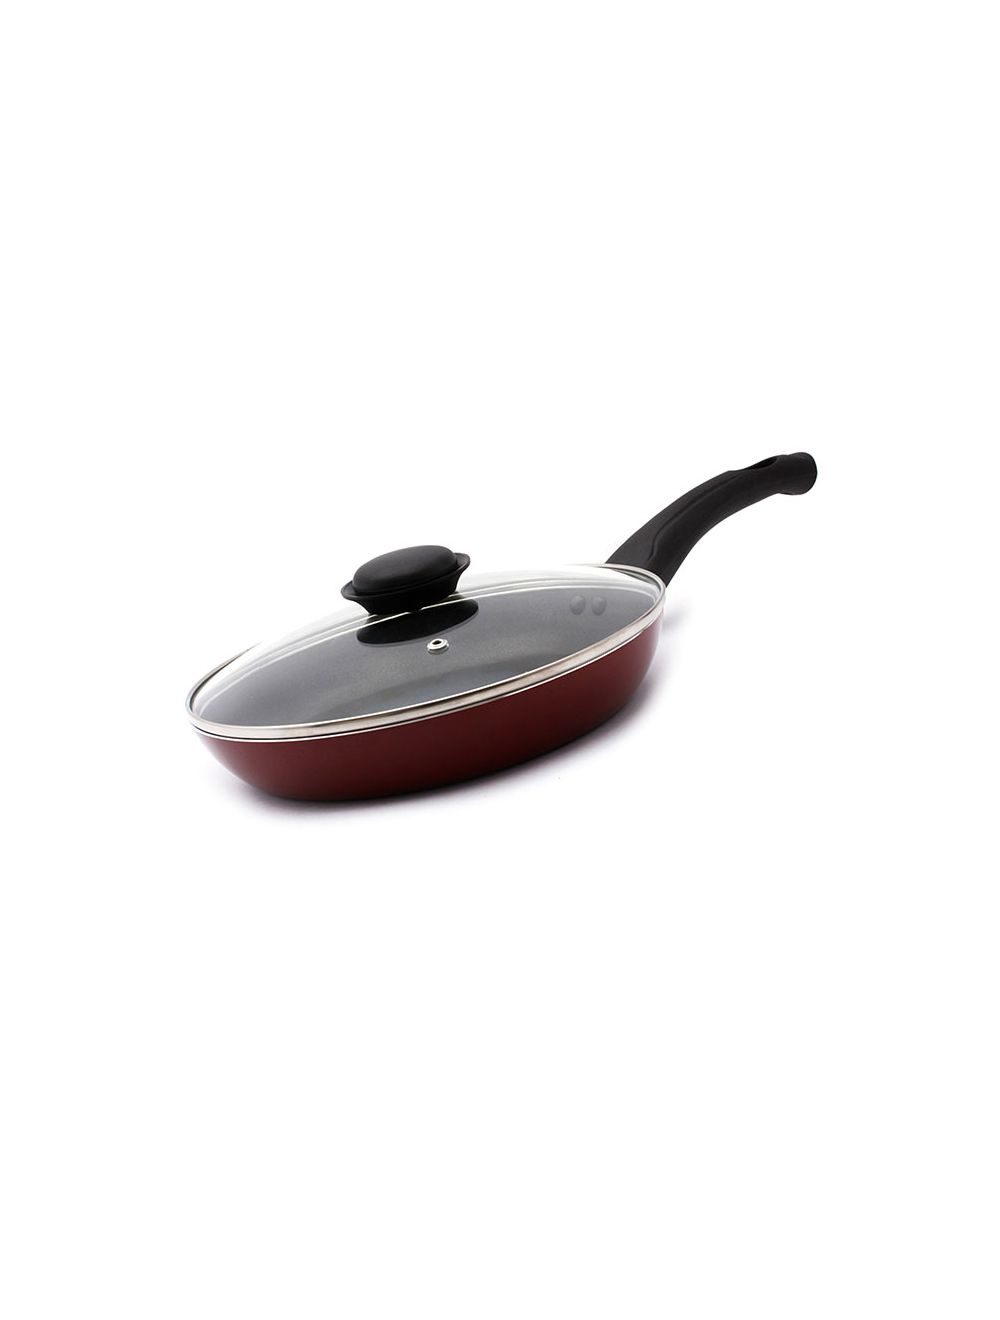 Royalford RF2951 Fry Pan With Lid, 24 CM